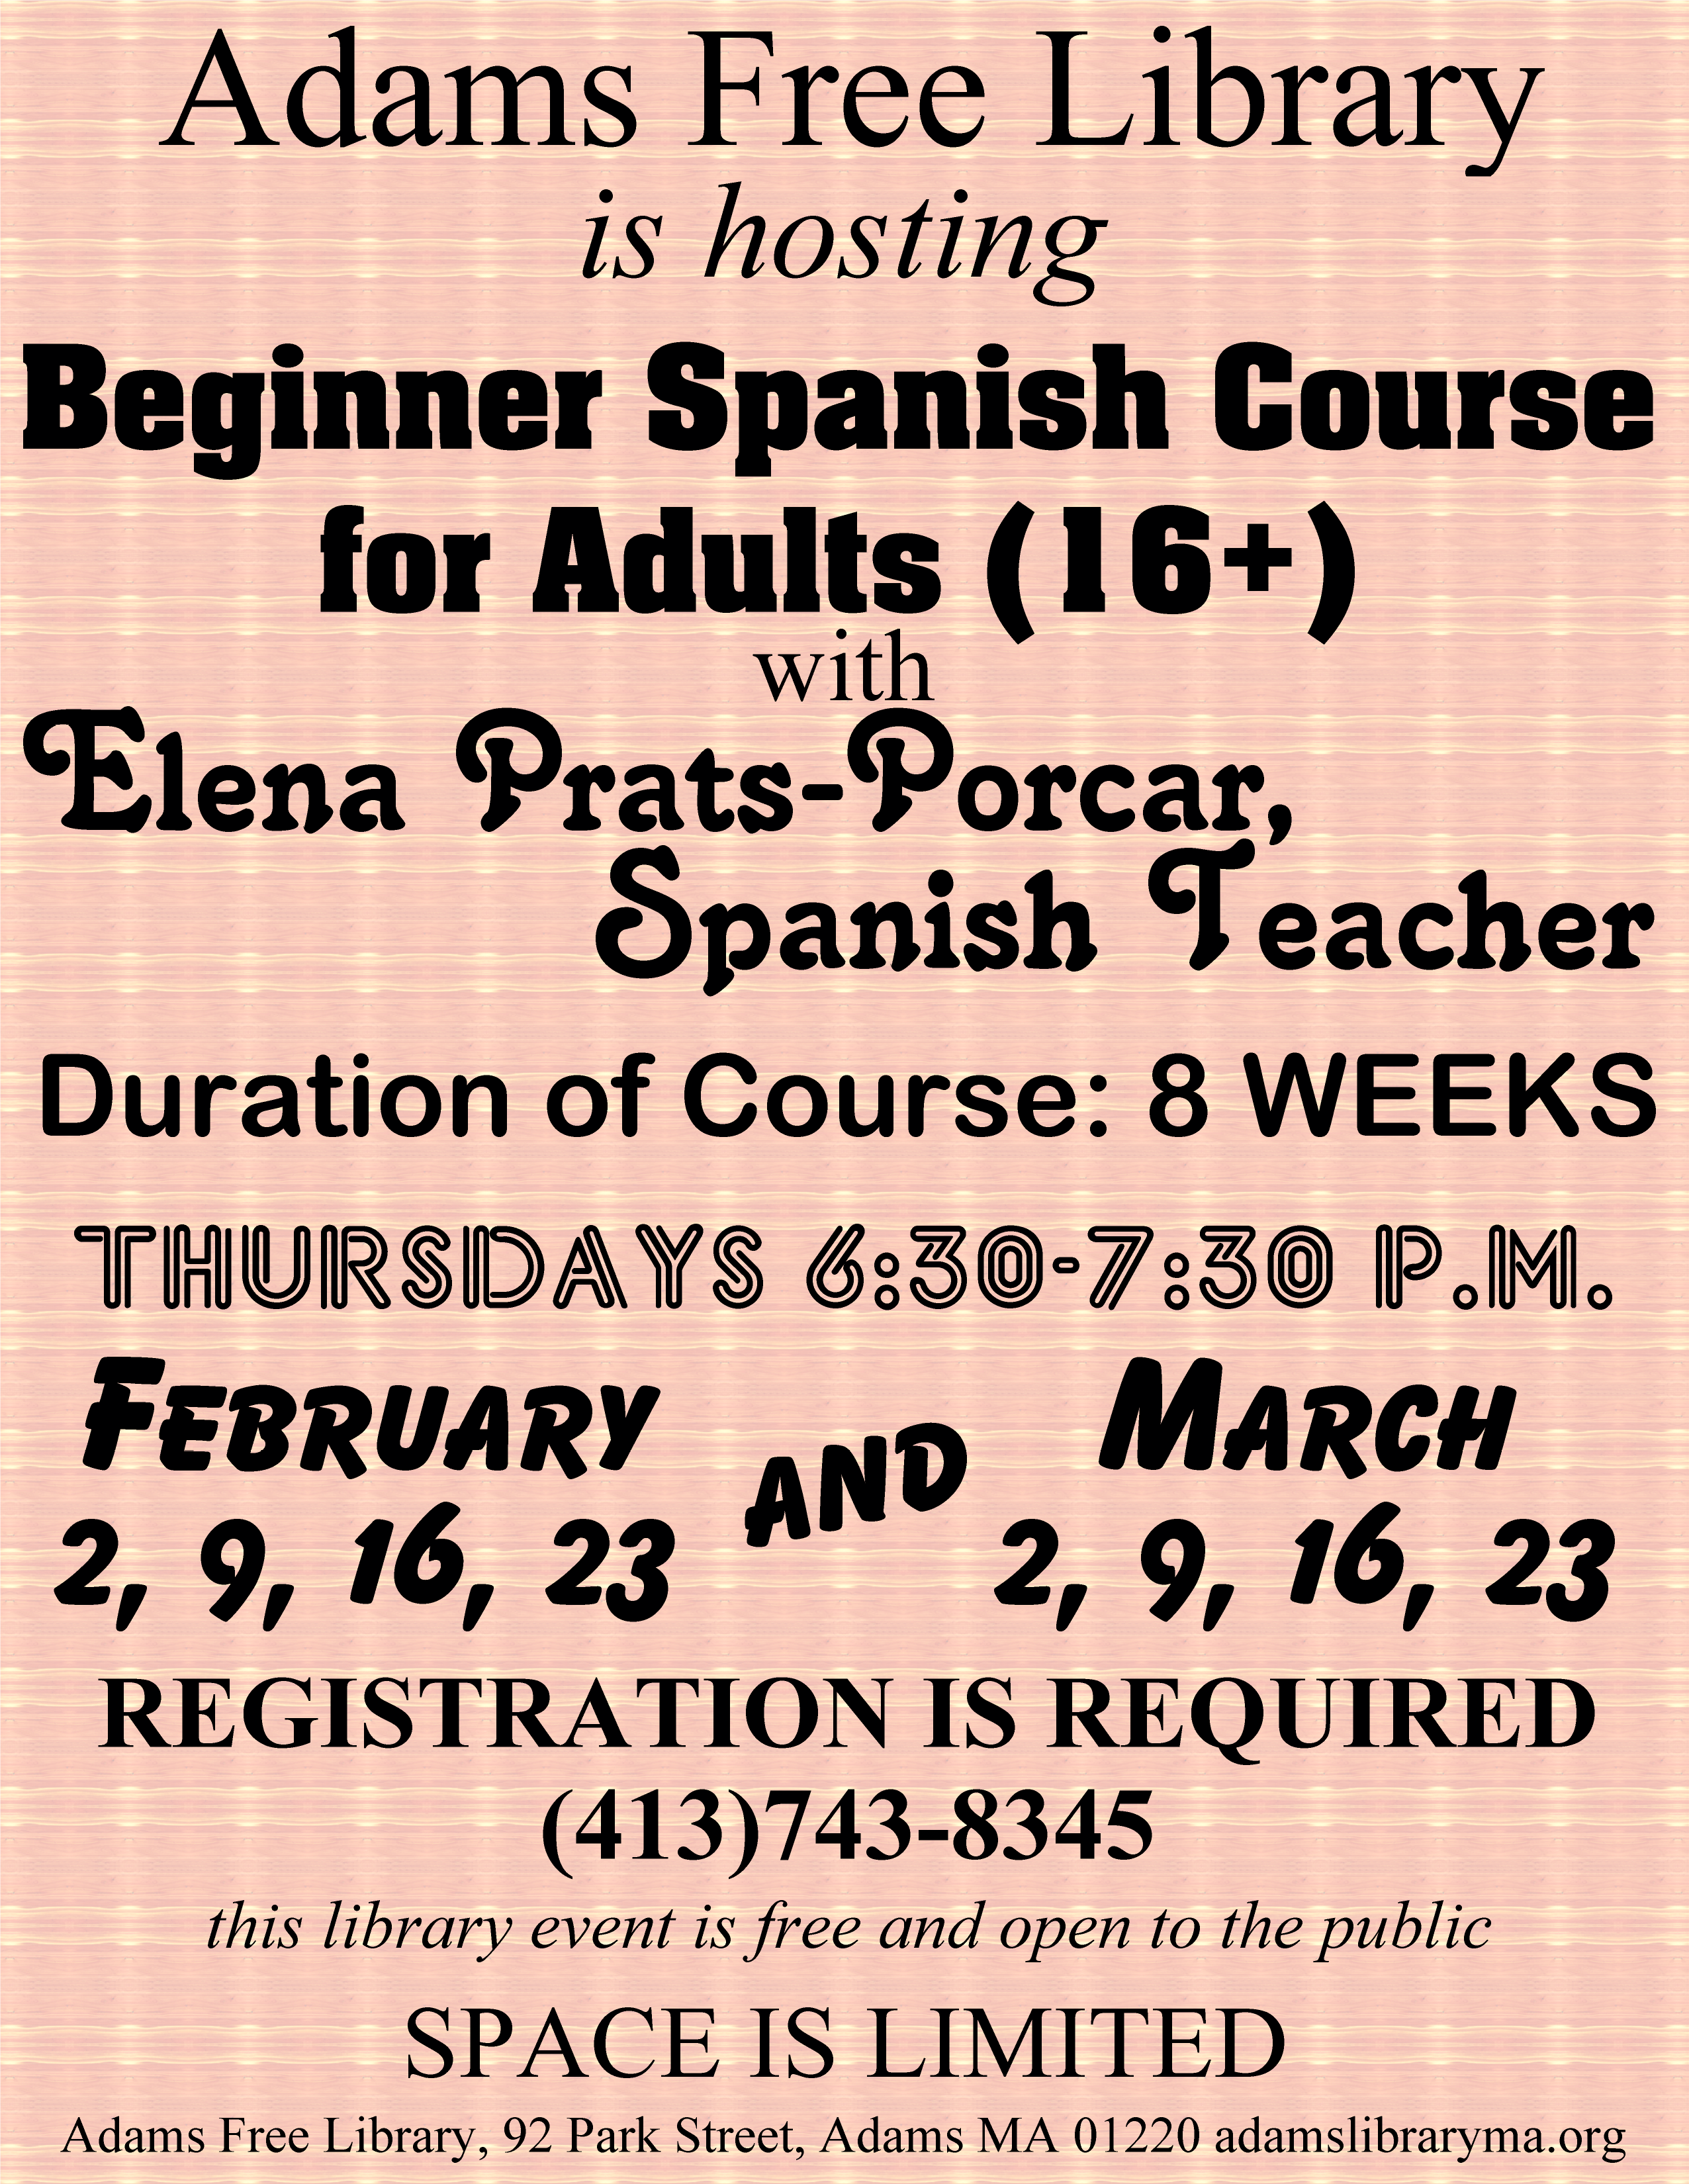 Registration Required for this event - Intro to Spanish @ Miller Annex Meeting Room